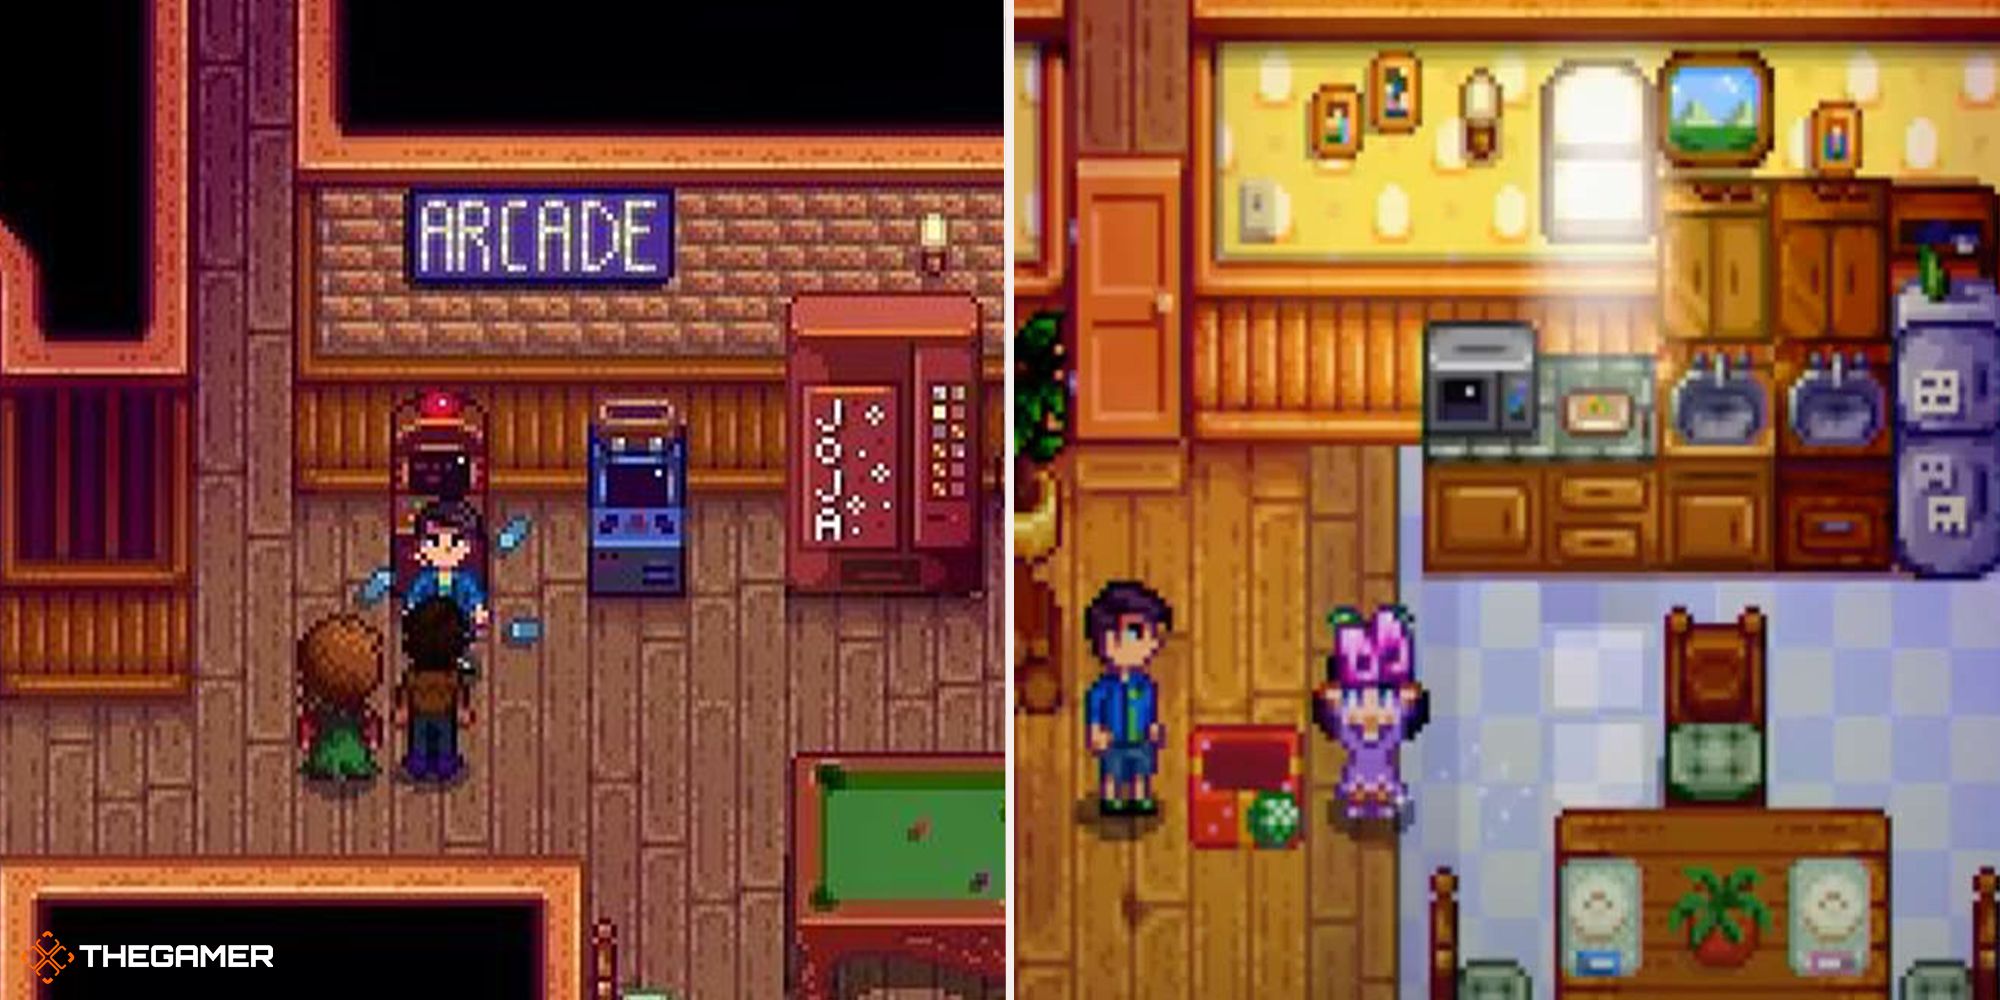 Stardew Valley - Shane at the Stardrop Saloon (left) and Marnie's Ranch (right)